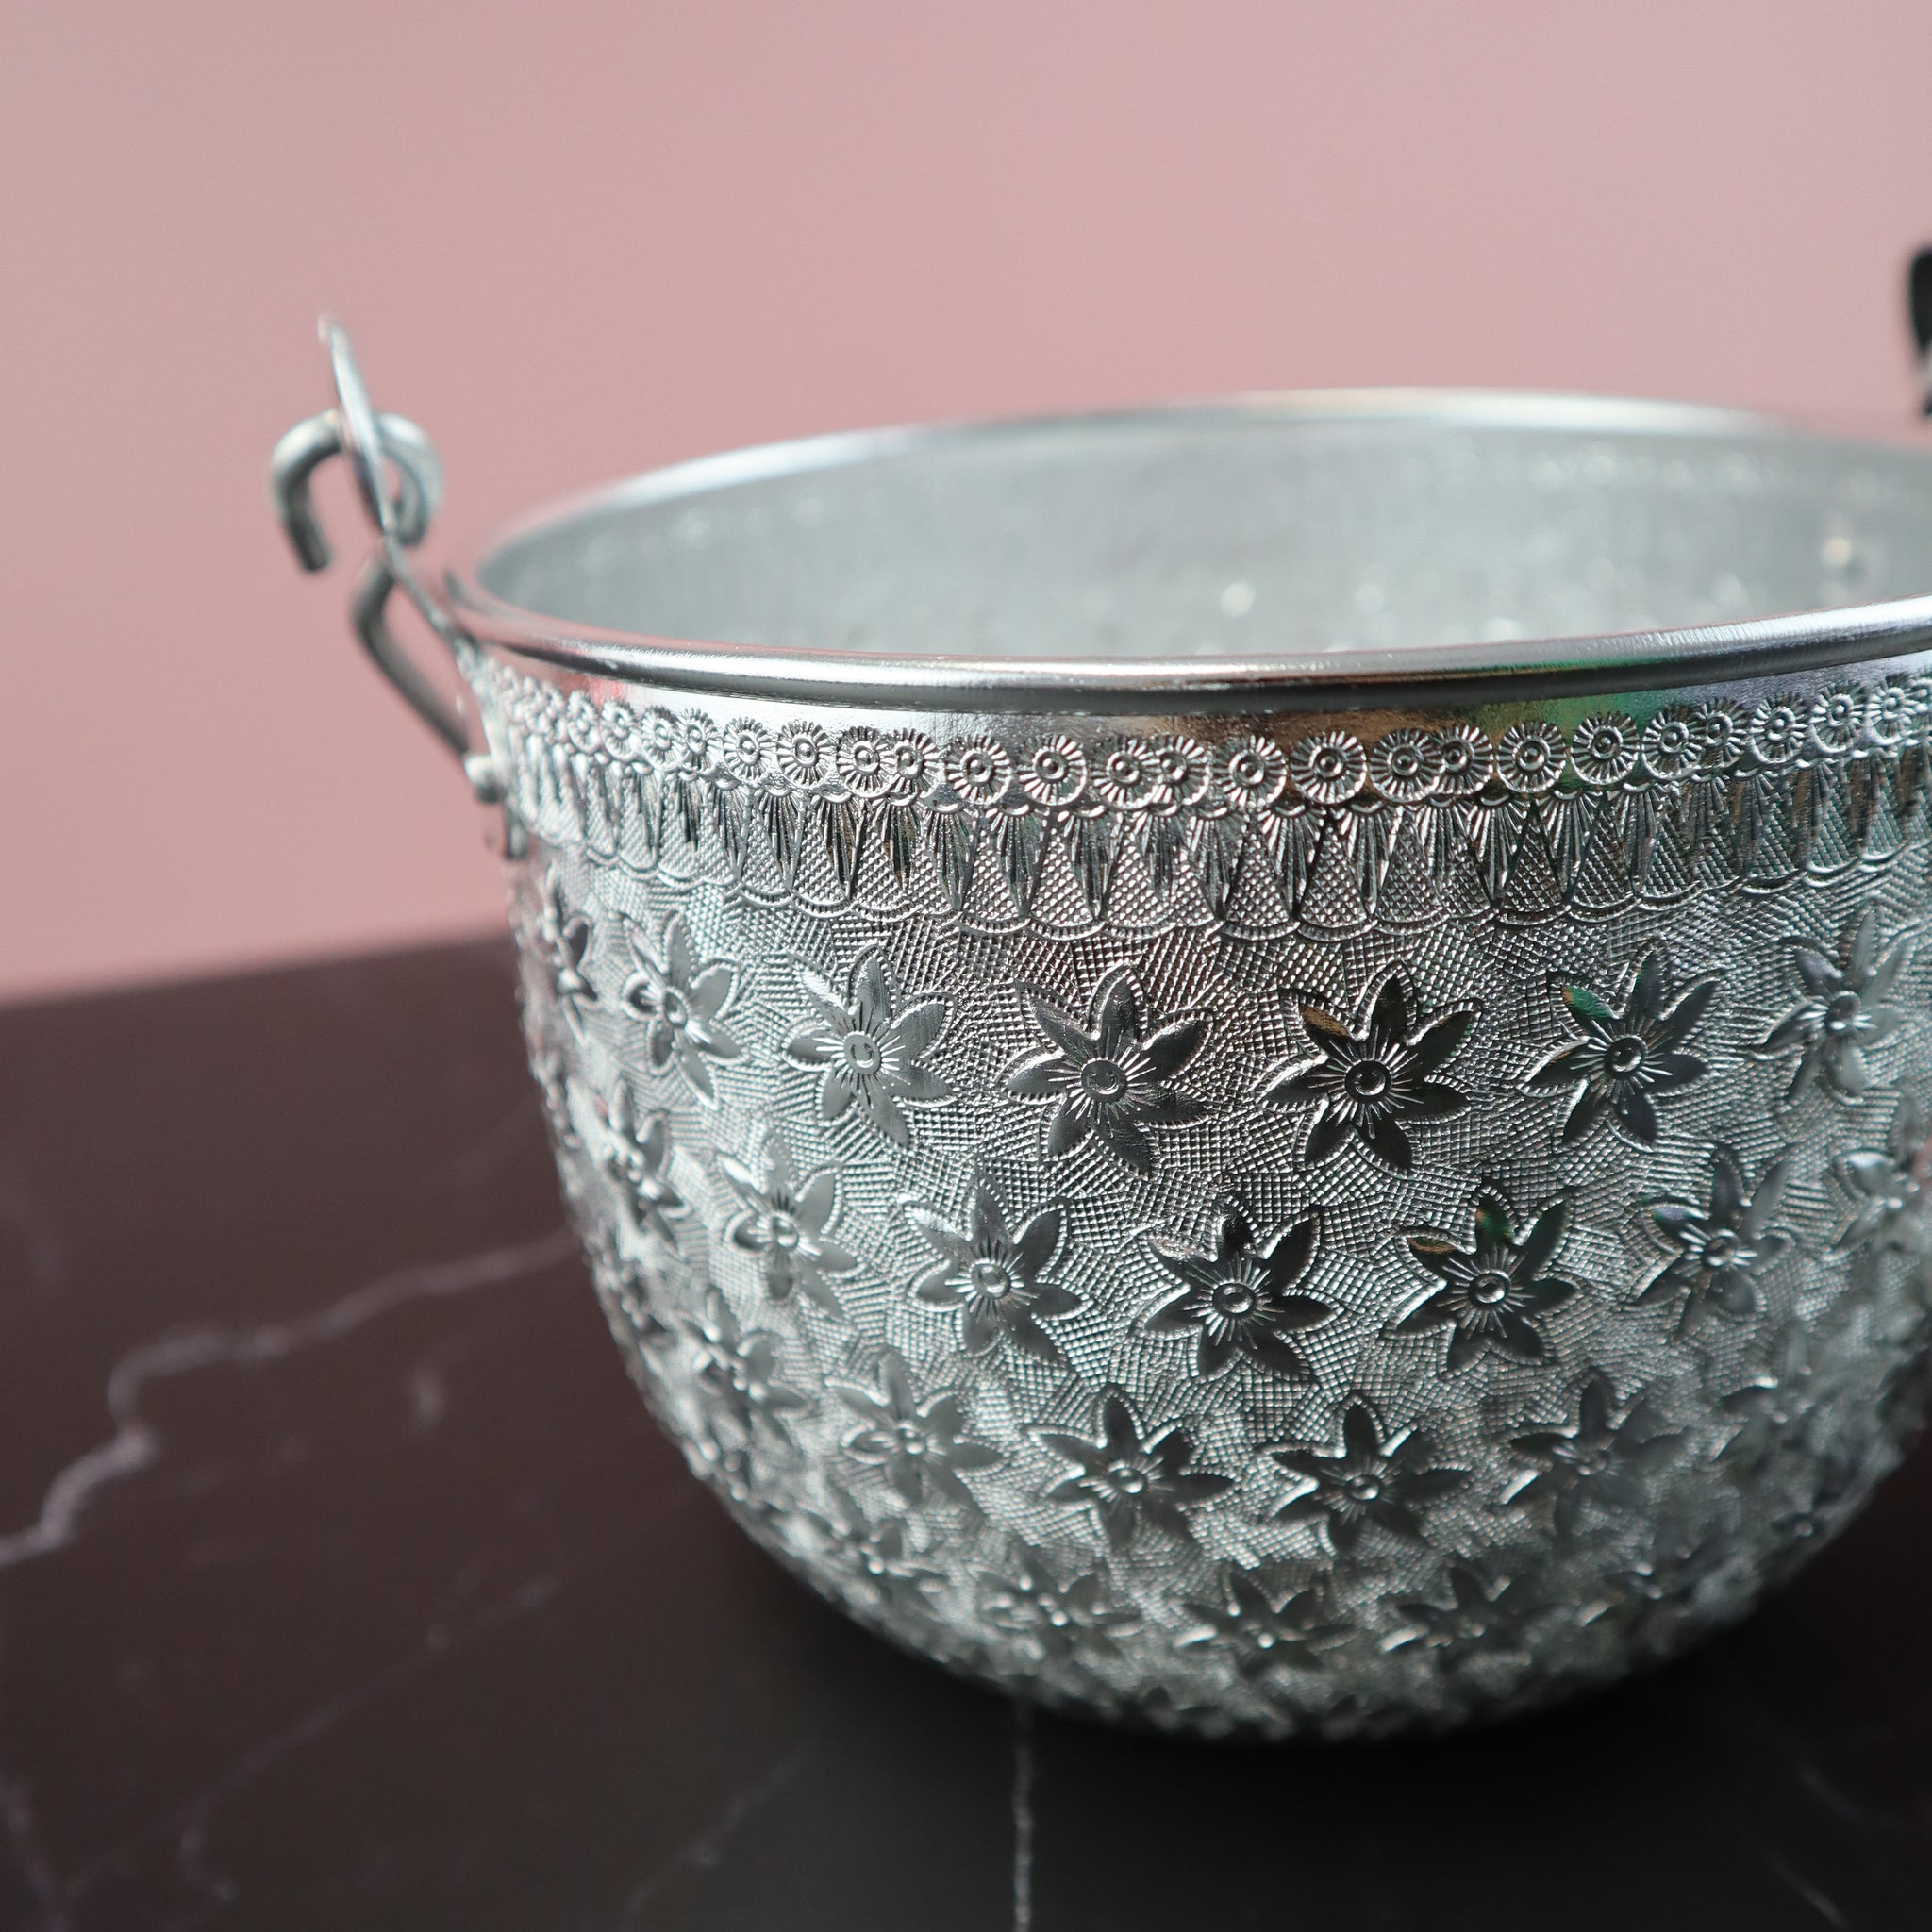 THAI VINTAGE INTRICATE FLOWER PATTERN ALUMINUM POT WITH HANDLE AND LID (SMALL)